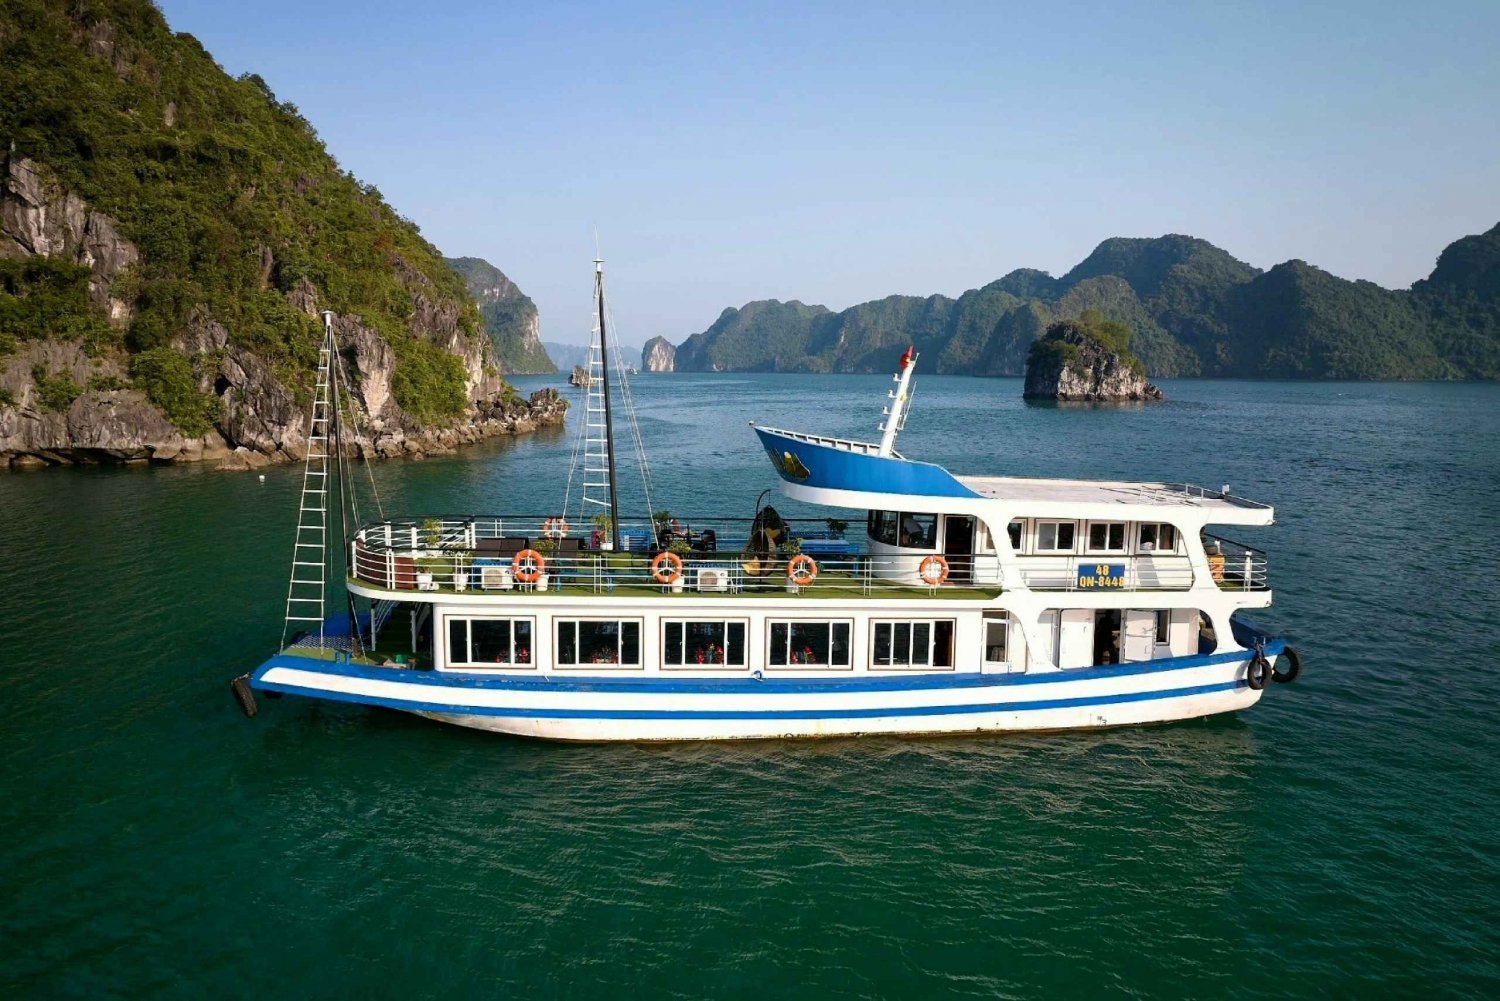 Halong Bay daytrip experience wt Titov, Surprising&Luon Cave